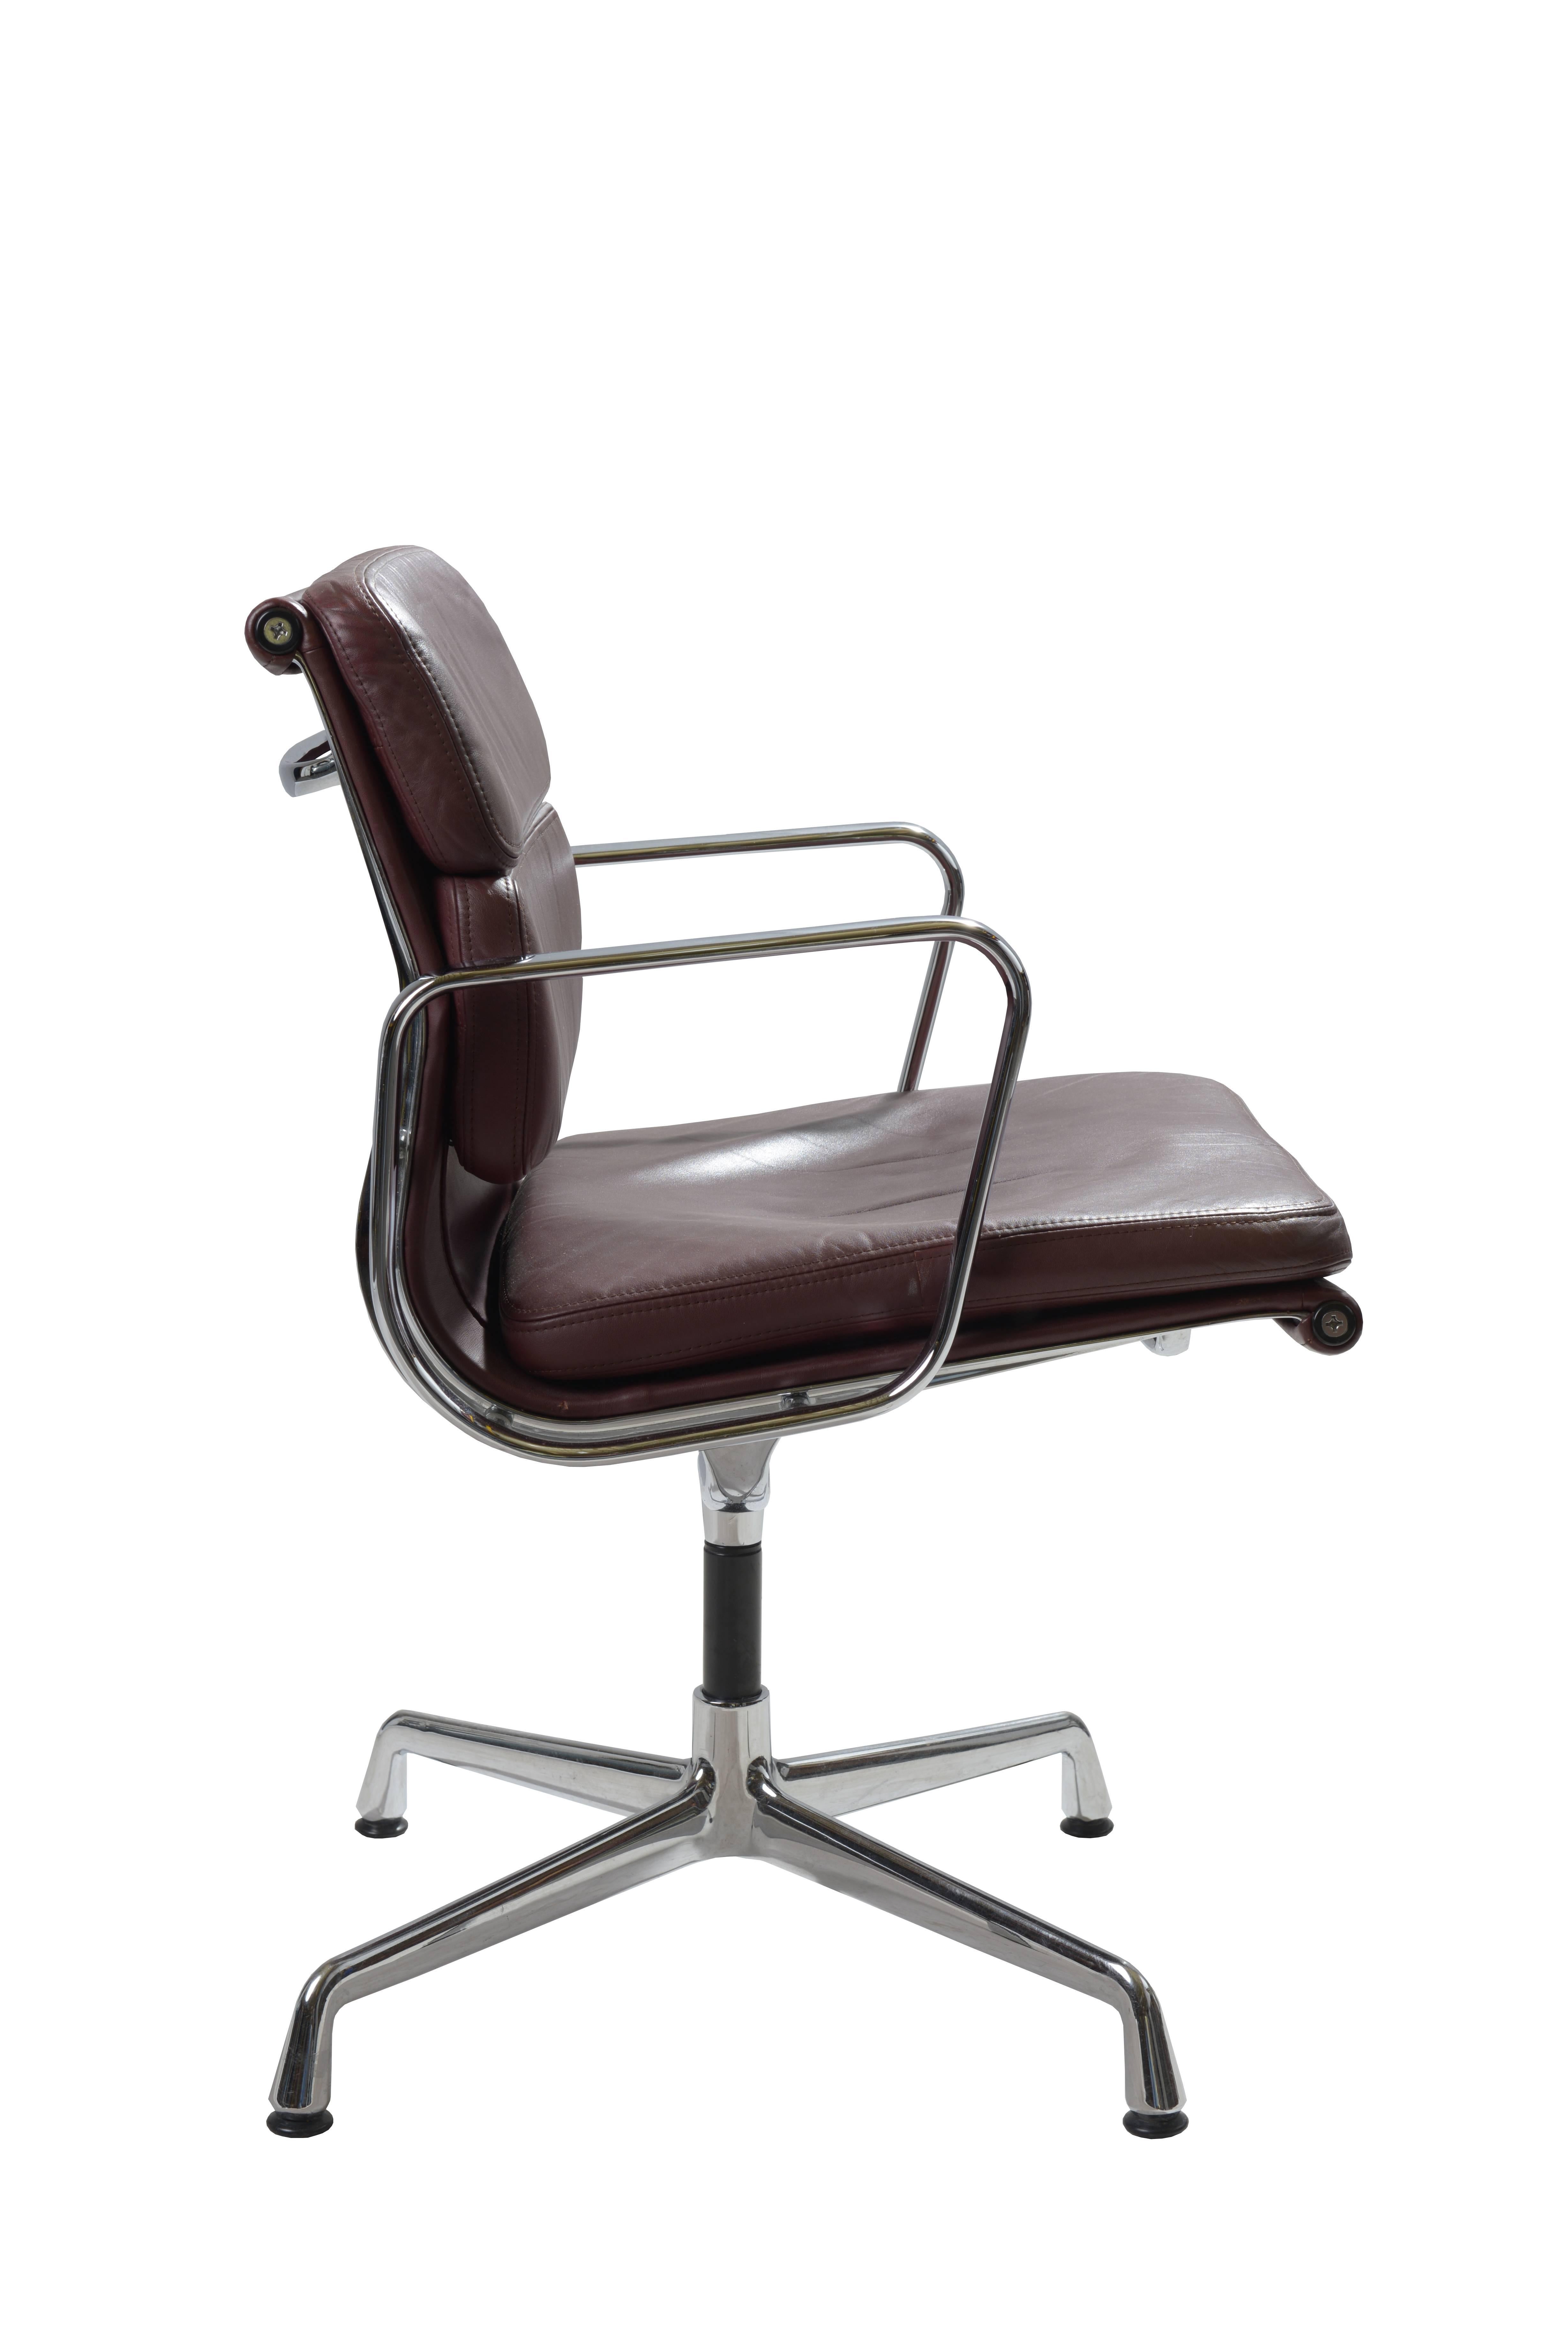 Mid-Century Modern Charles & Ray Eames EA 208 Leather and Chrome Low Back Soft Pad Chairs